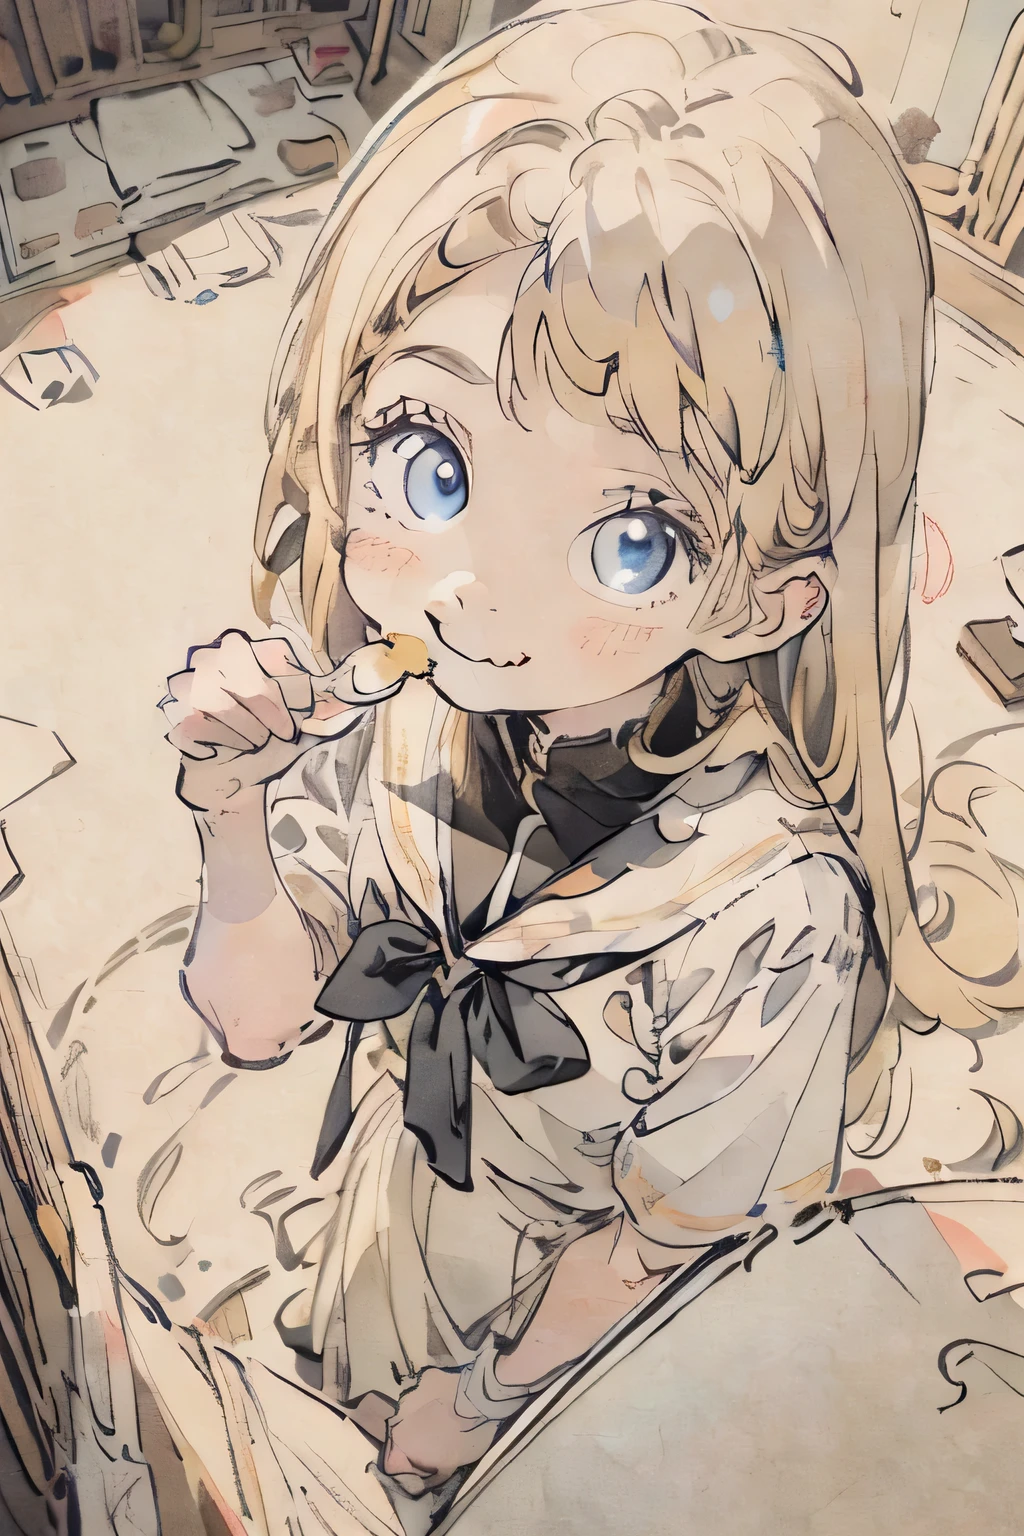 #Quality(8k,best quality,masterpiece,cinematic),solo, #1 girl(cute, kawaii,small kid,skin color yellow,smile kindly,hair floating,hair color blond,long hairblue eyes,big eyes,narrow her eyes,eating cake,sailor uniform,upper body,from above,big brest),#background(inside,messy room,from above)